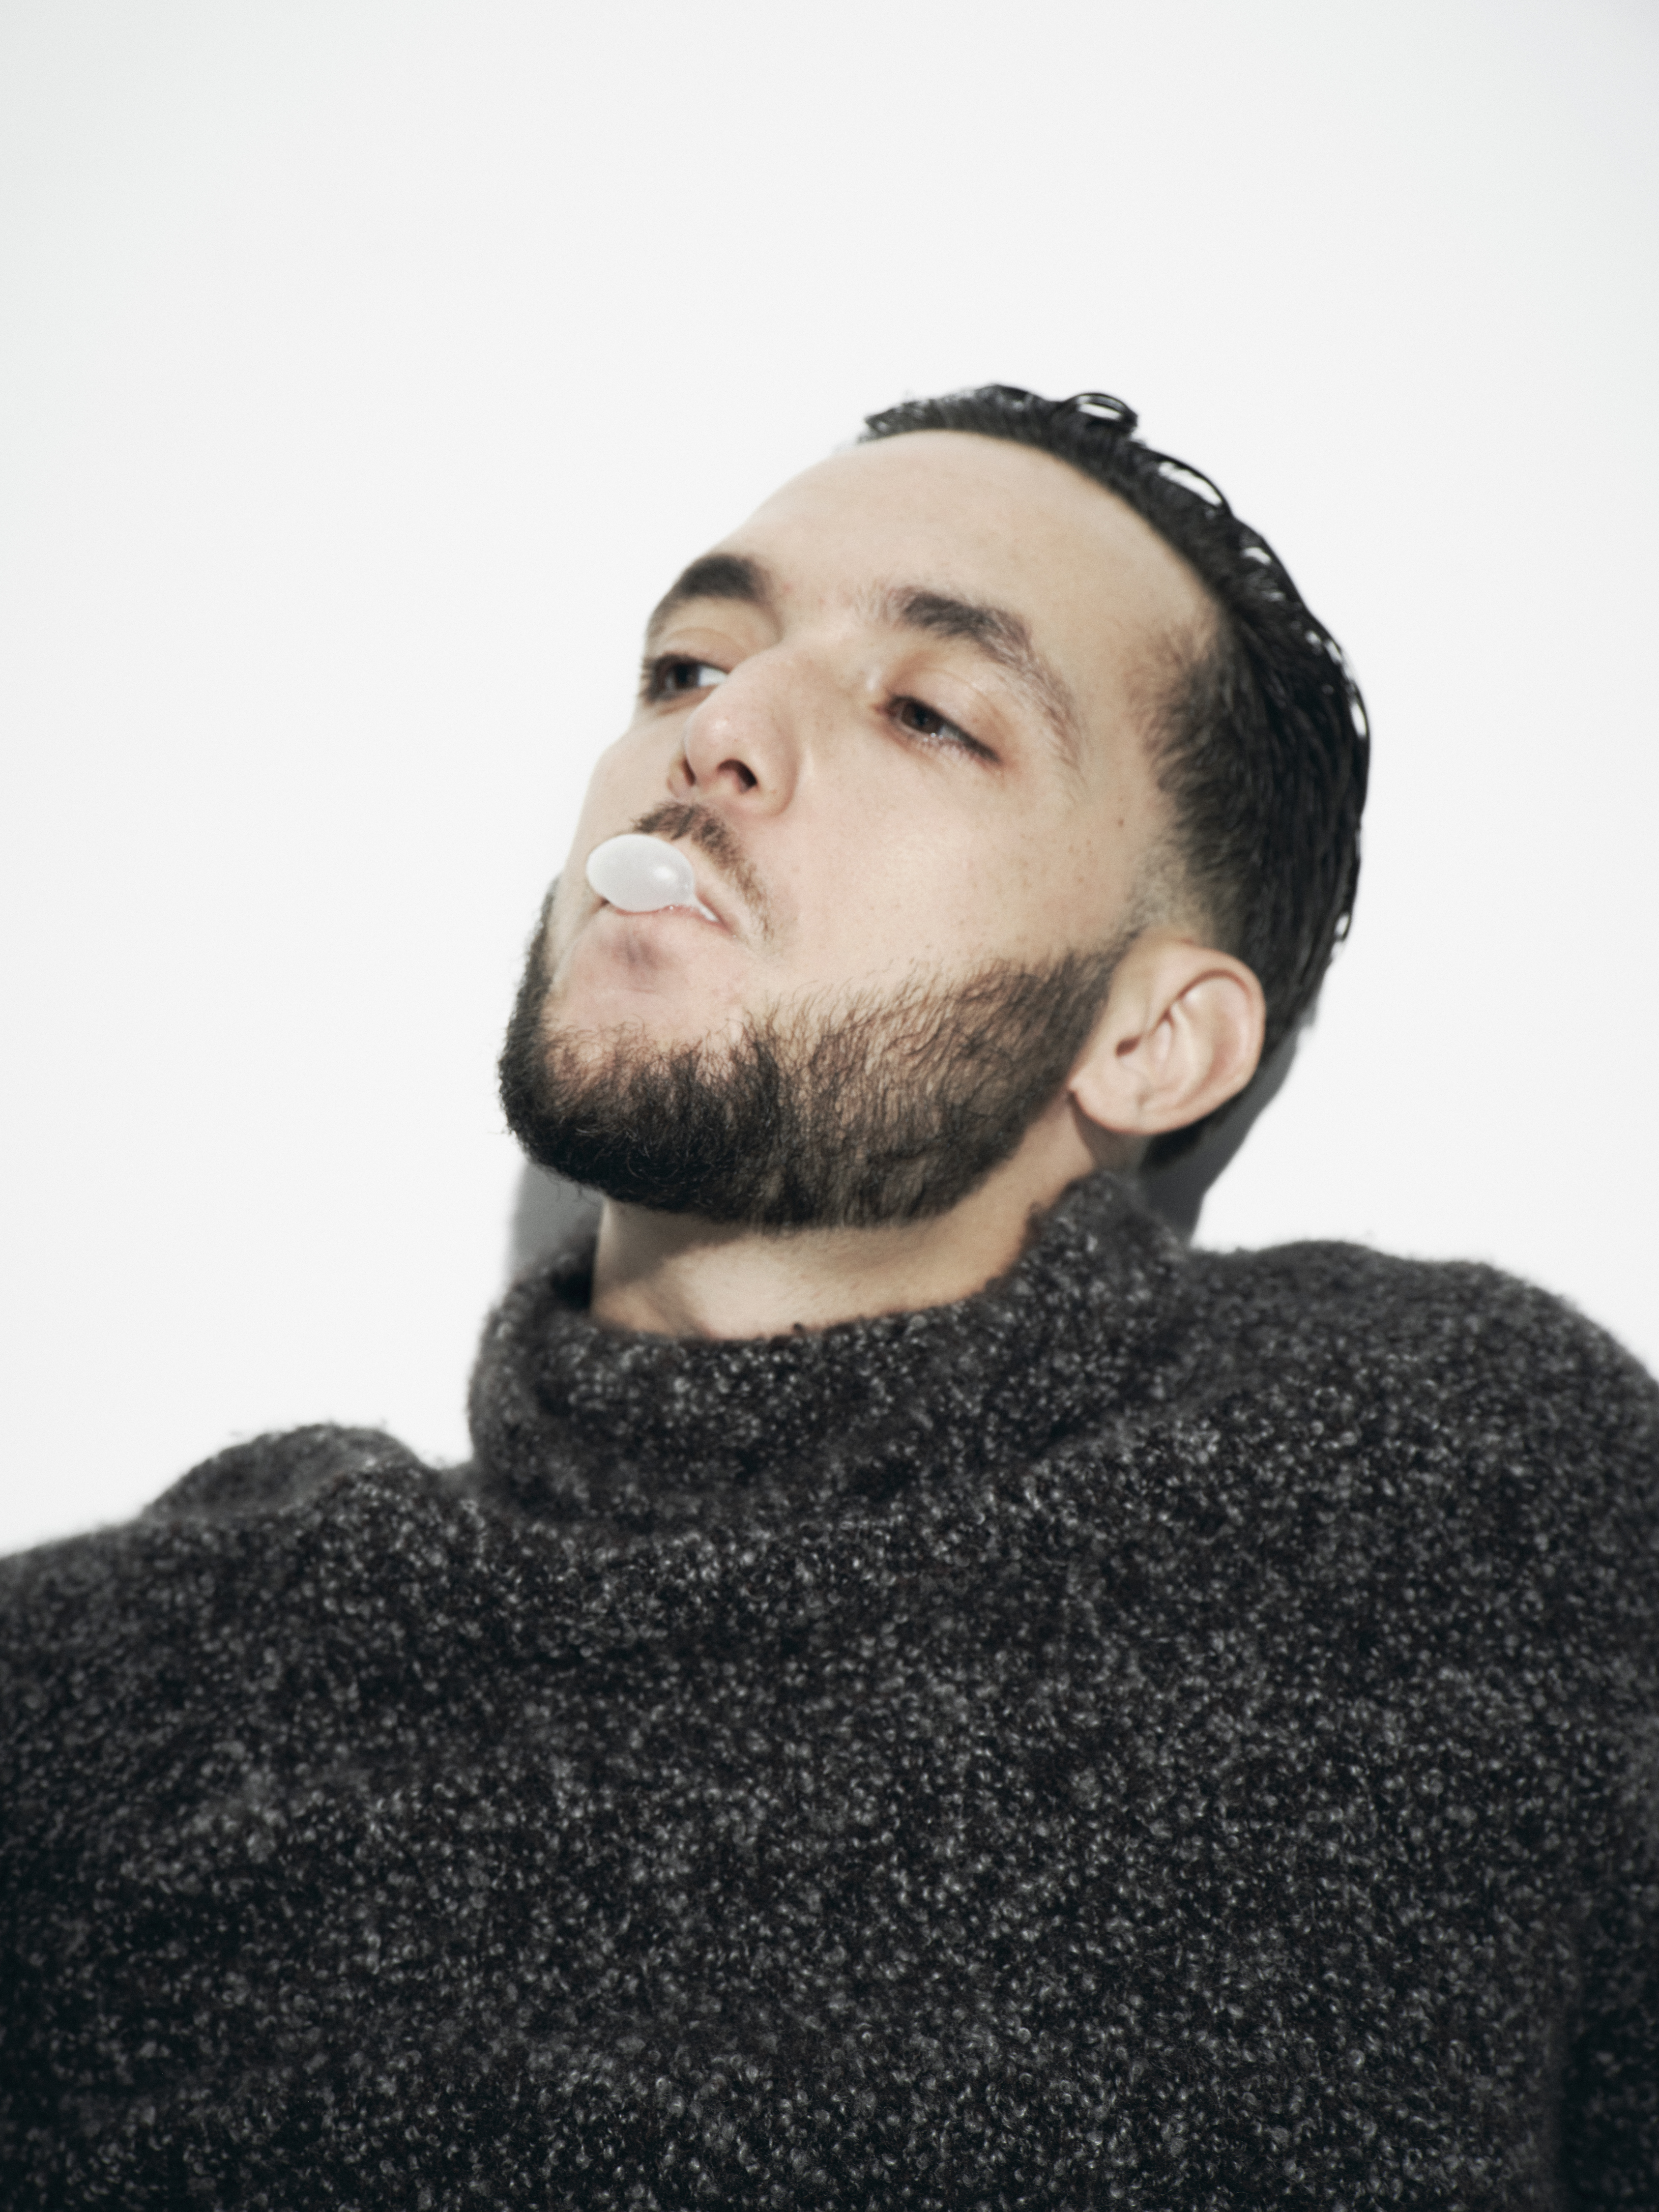 How Spanish Rapper C. Tangana is Changing the Game